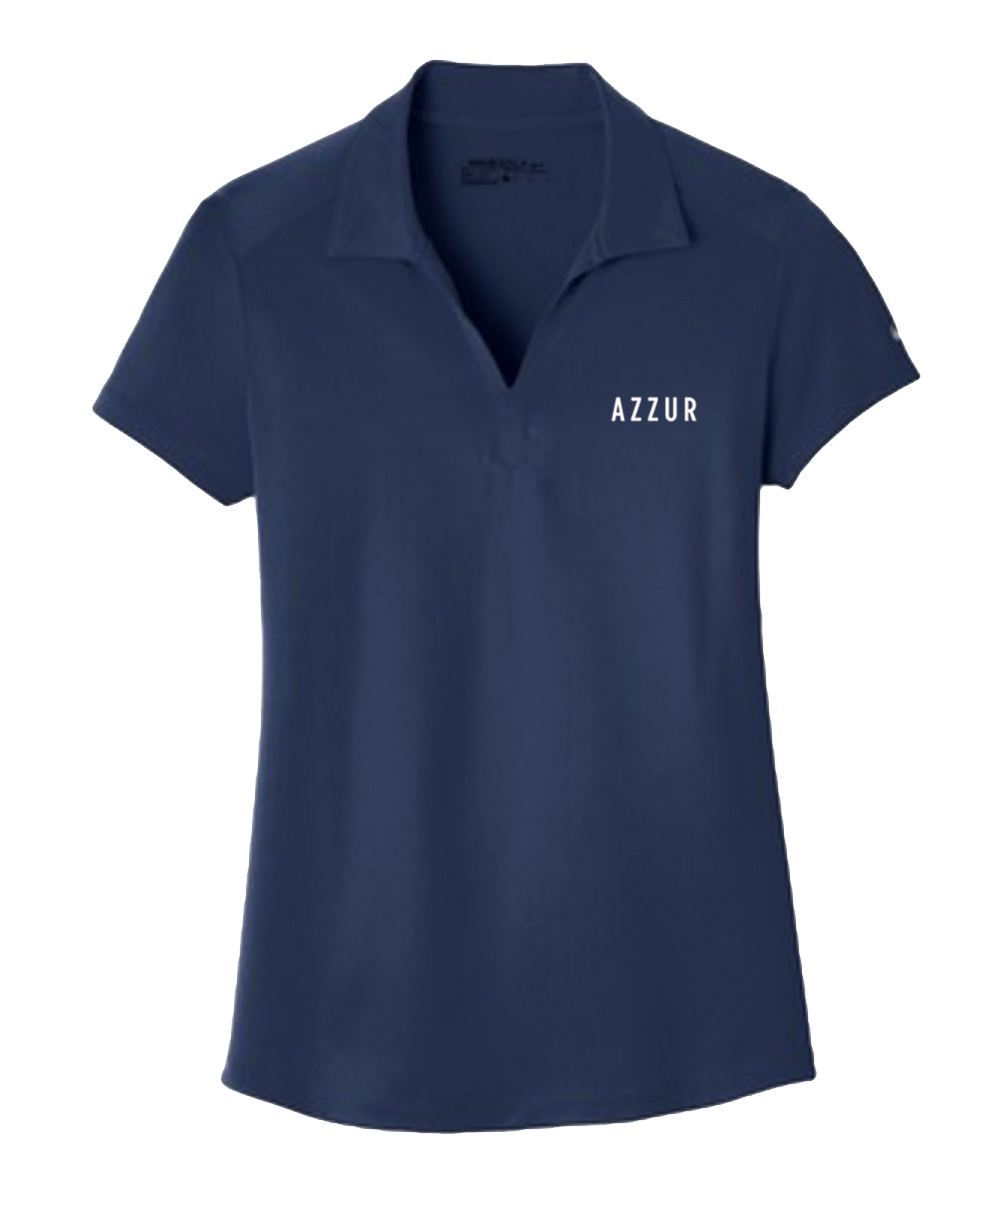 AZZUR -  Embroidered Womens Polo (Navy)